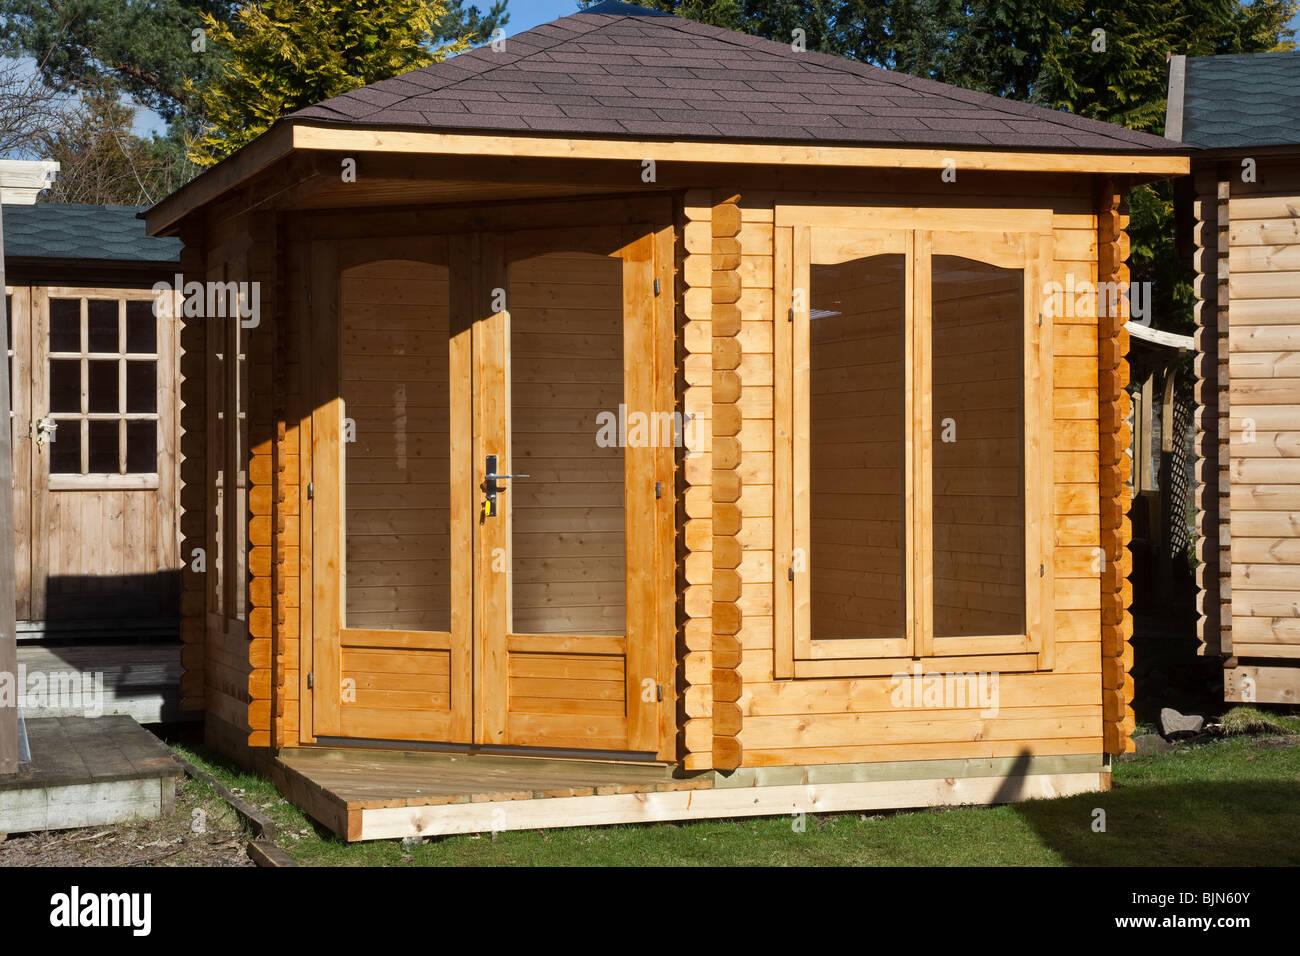 Garden Shed, Outbuilding, chalet, garden, house, architecture, summer, home, wood, nature, building, cottage, Summerhouse or Countryside Cabin, UK Stock Photo